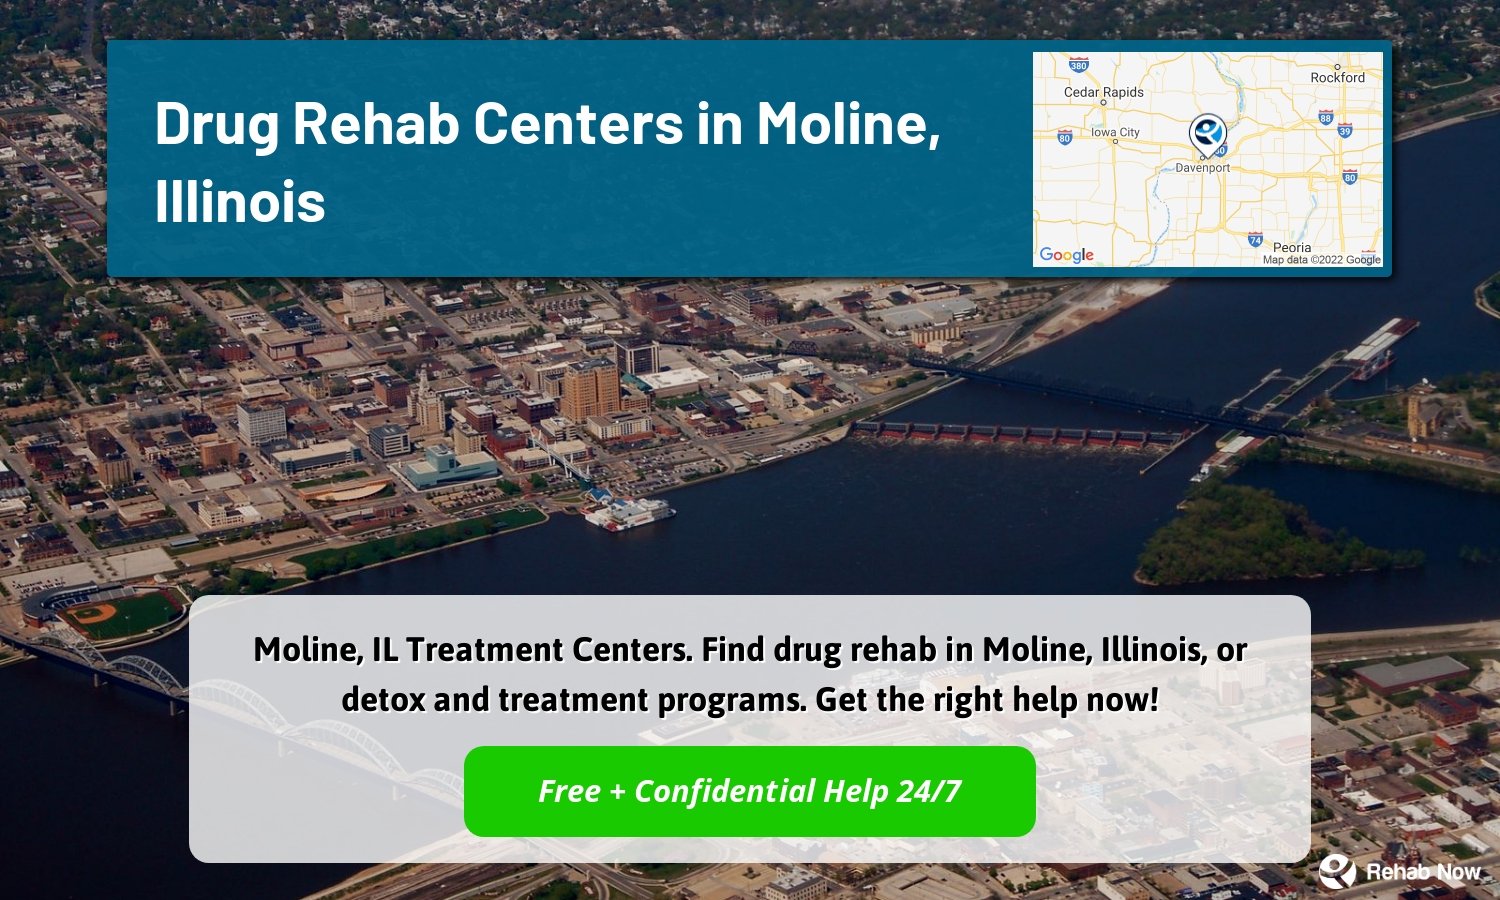 Moline, IL Treatment Centers. Find drug rehab in Moline, Illinois, or detox and treatment programs. Get the right help now!